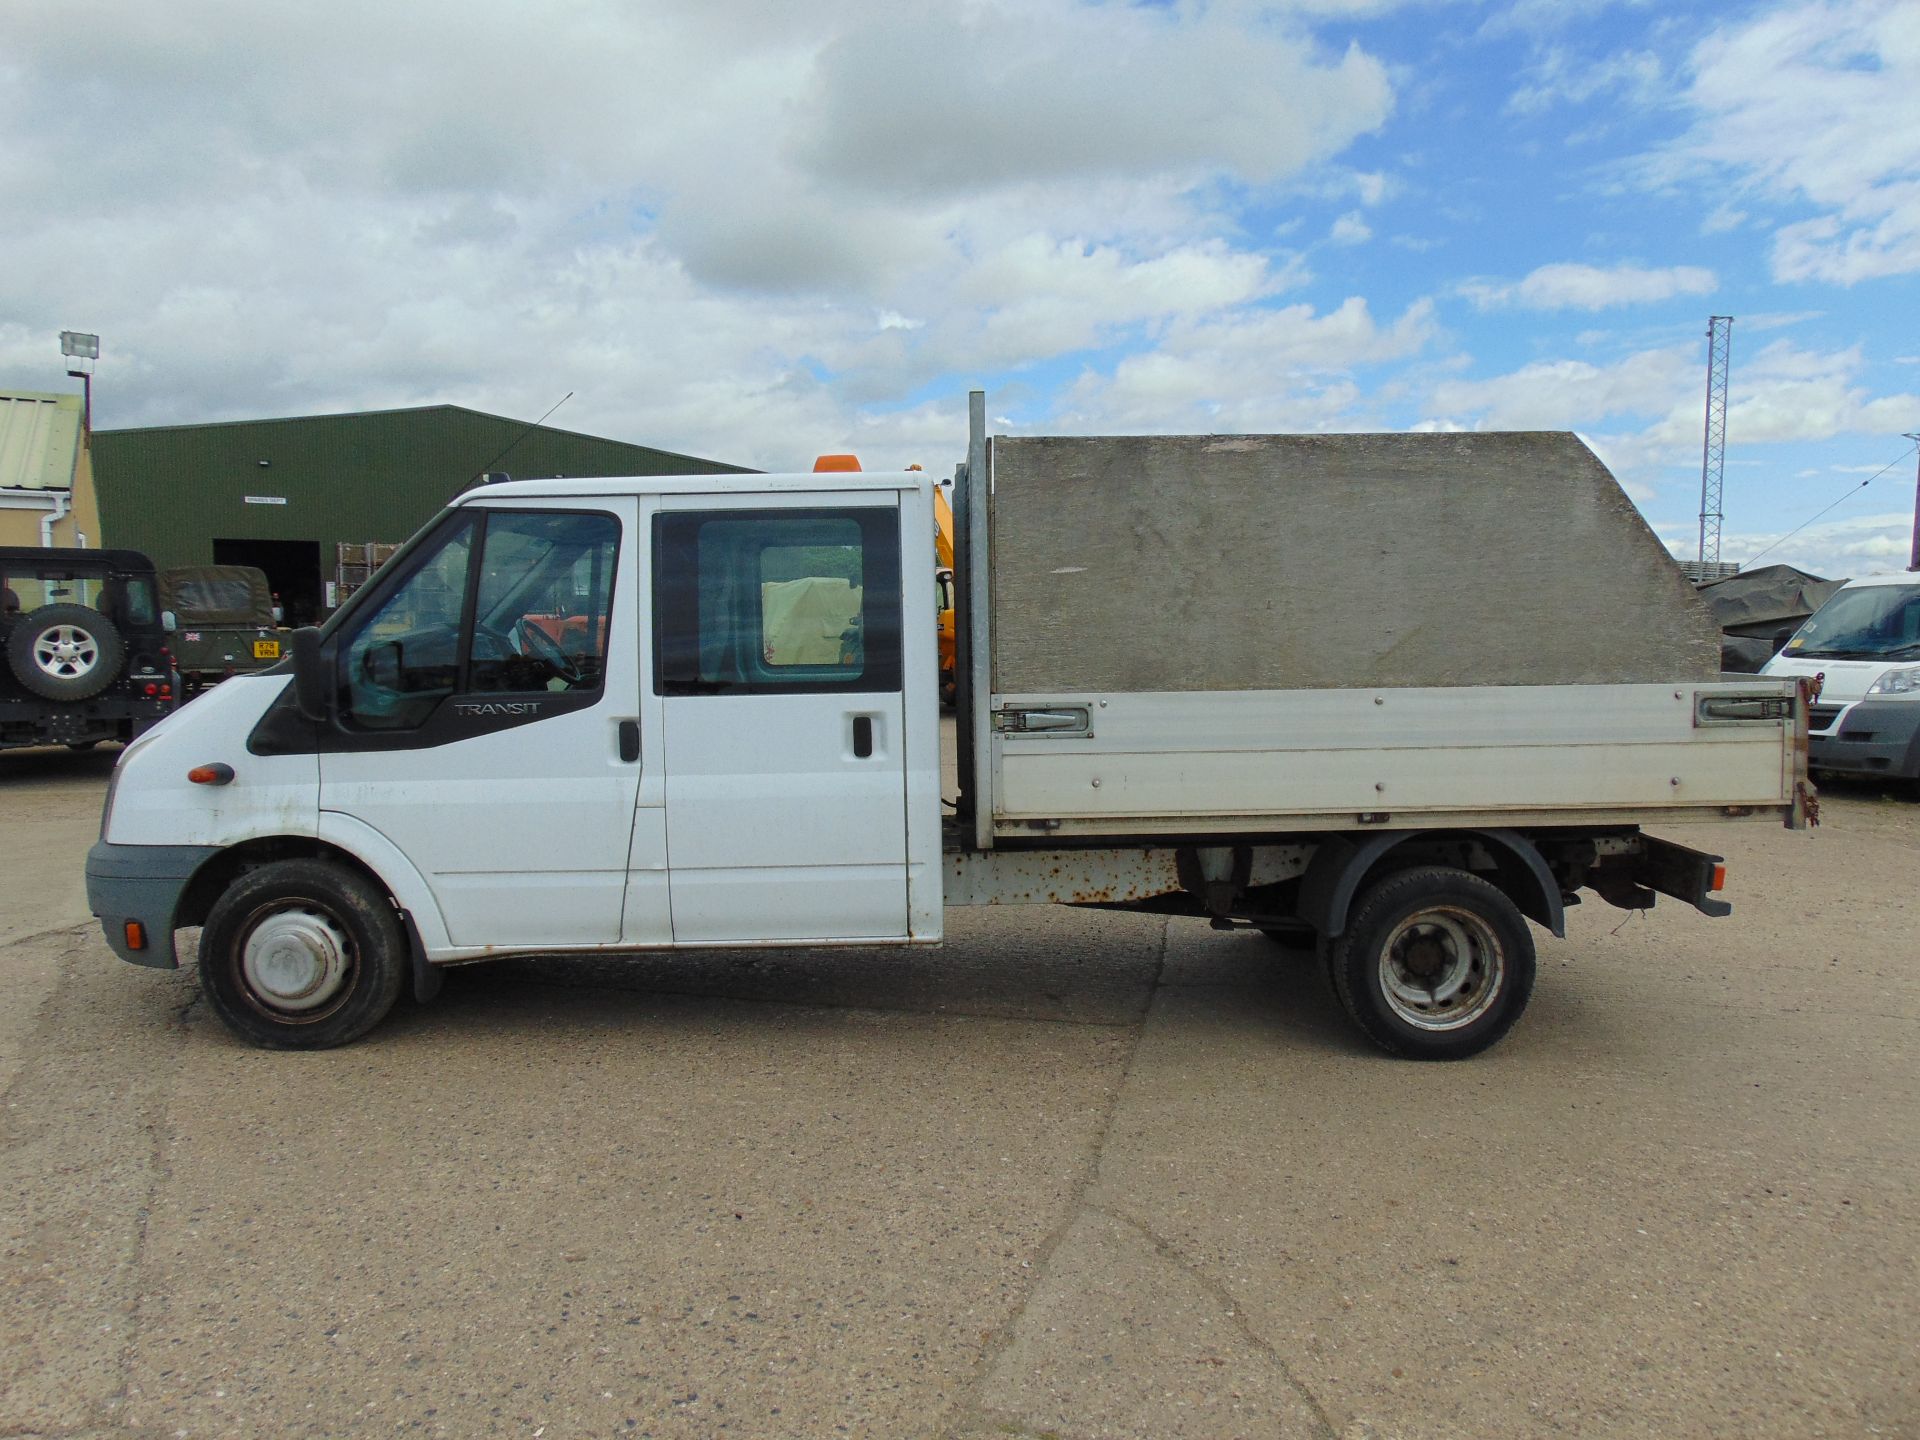 Ford Transit 115 T350 Crew Cab Flat Bed Tipper - Image 4 of 15